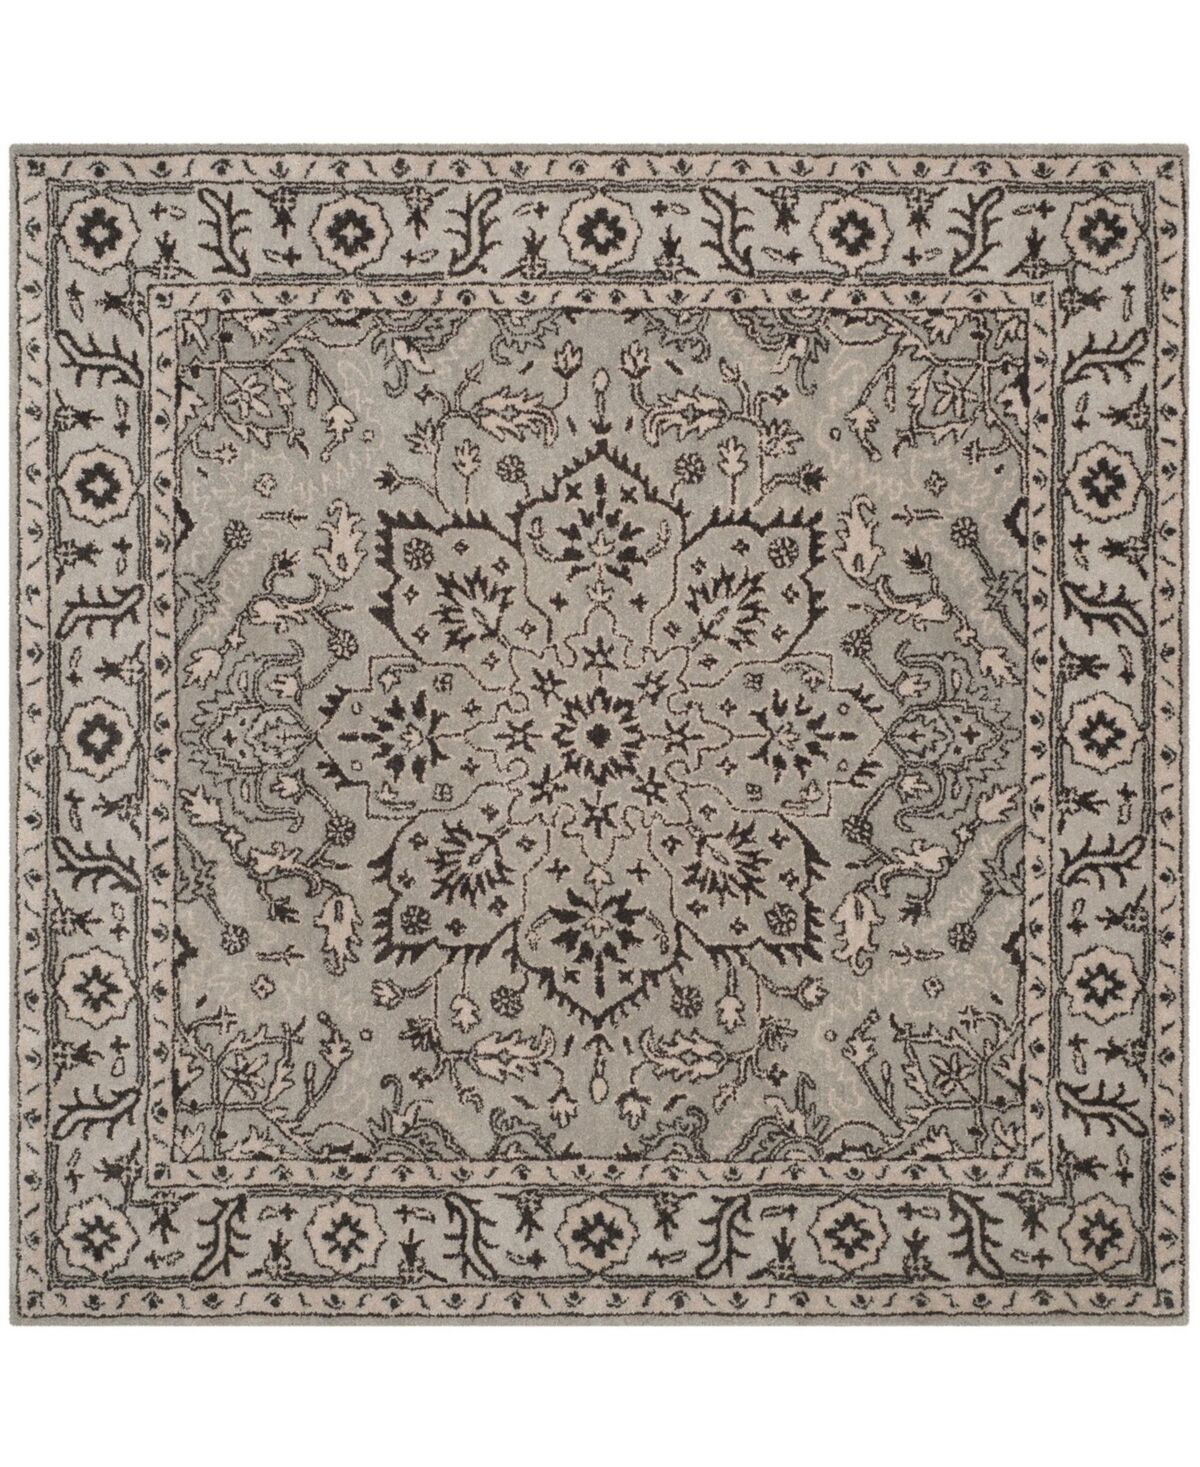 Safavieh Antiquity At58 Gray and Beige 6' x 6' Square Area Rug - Gray